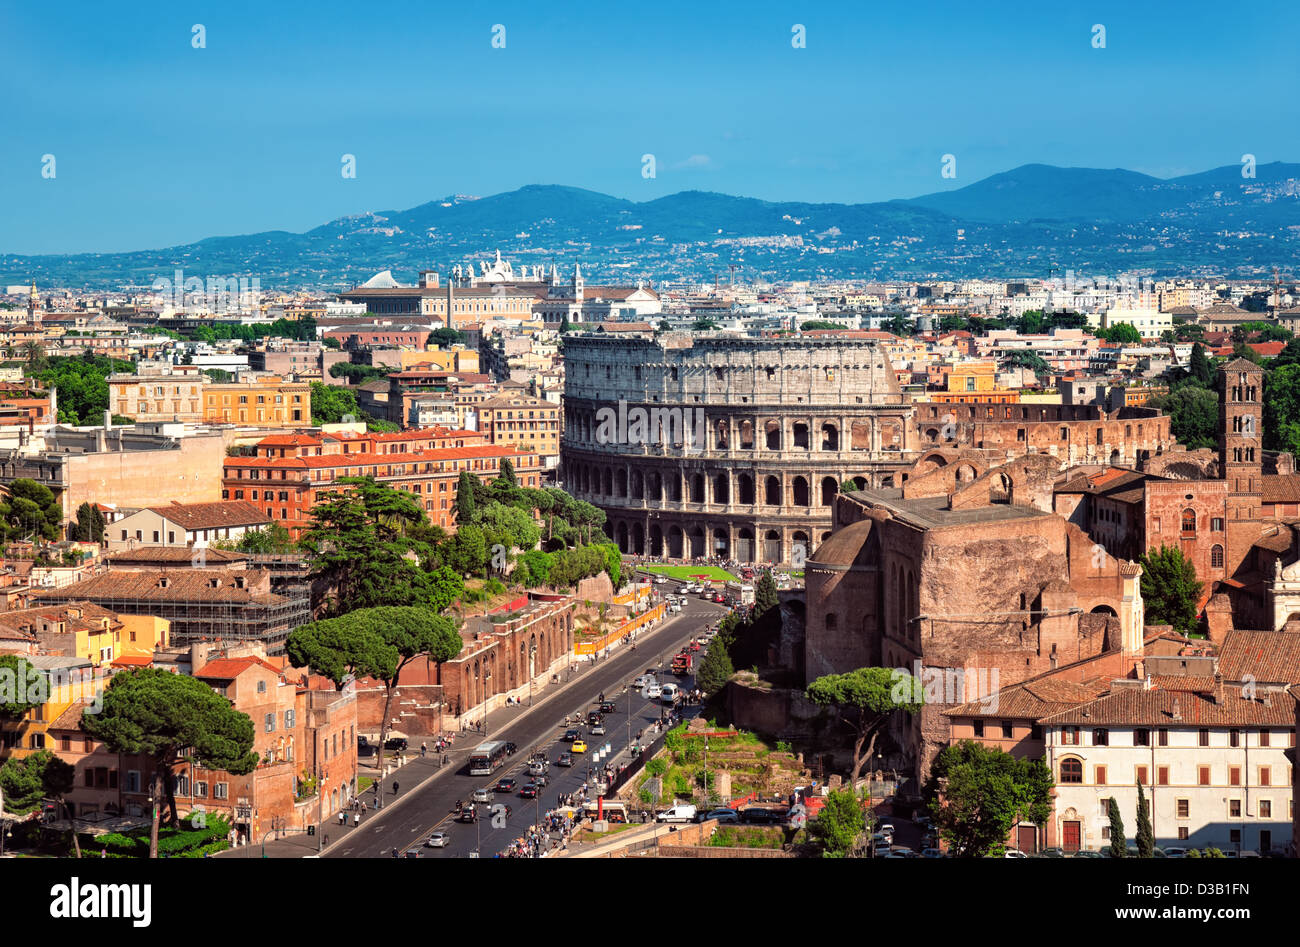 The Colosseum, Rome - Italy. Stock Photo